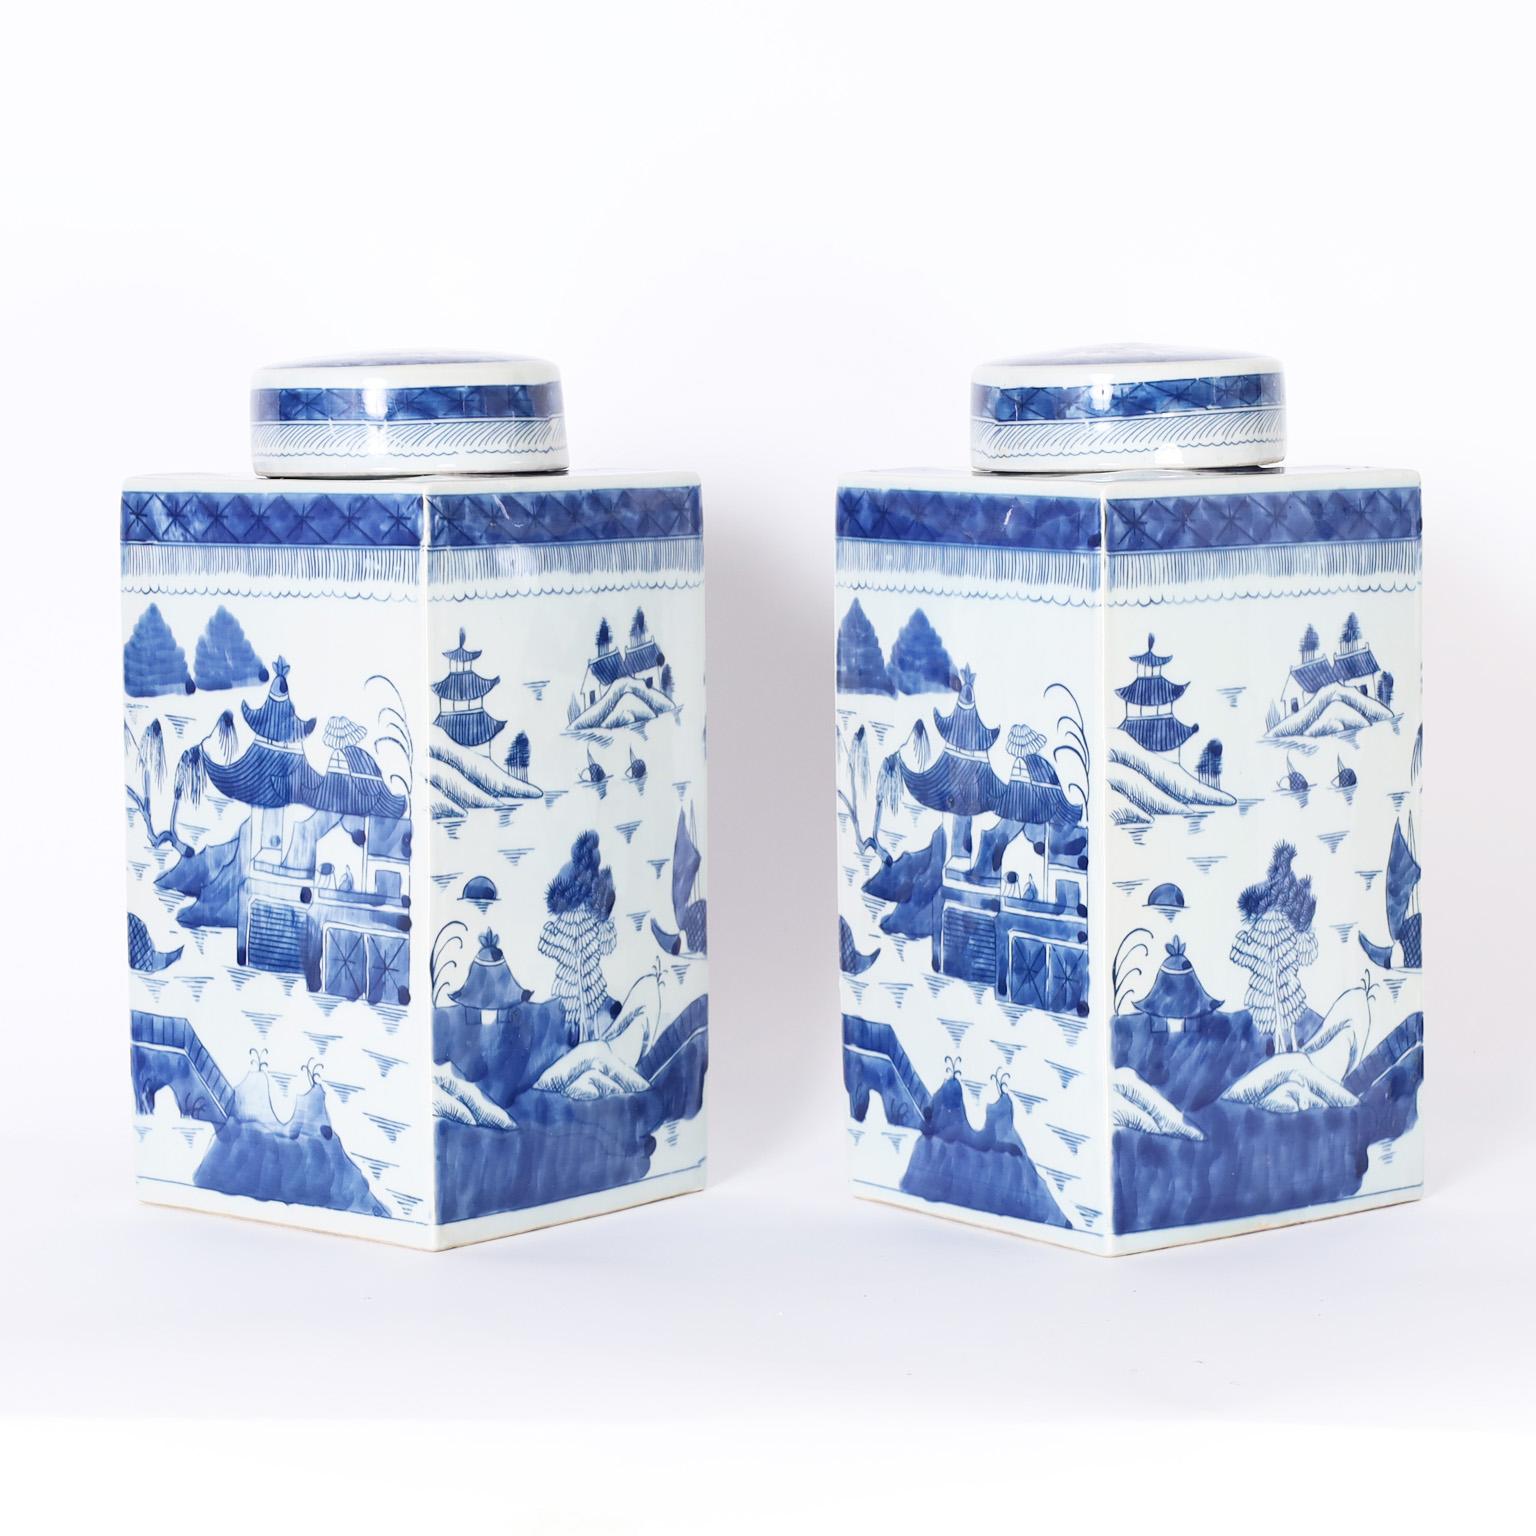 Charming pair of Chinese blue and white porcelain lidded rectangular tea caddies or jars hand decorated with pagodas and landscapes.